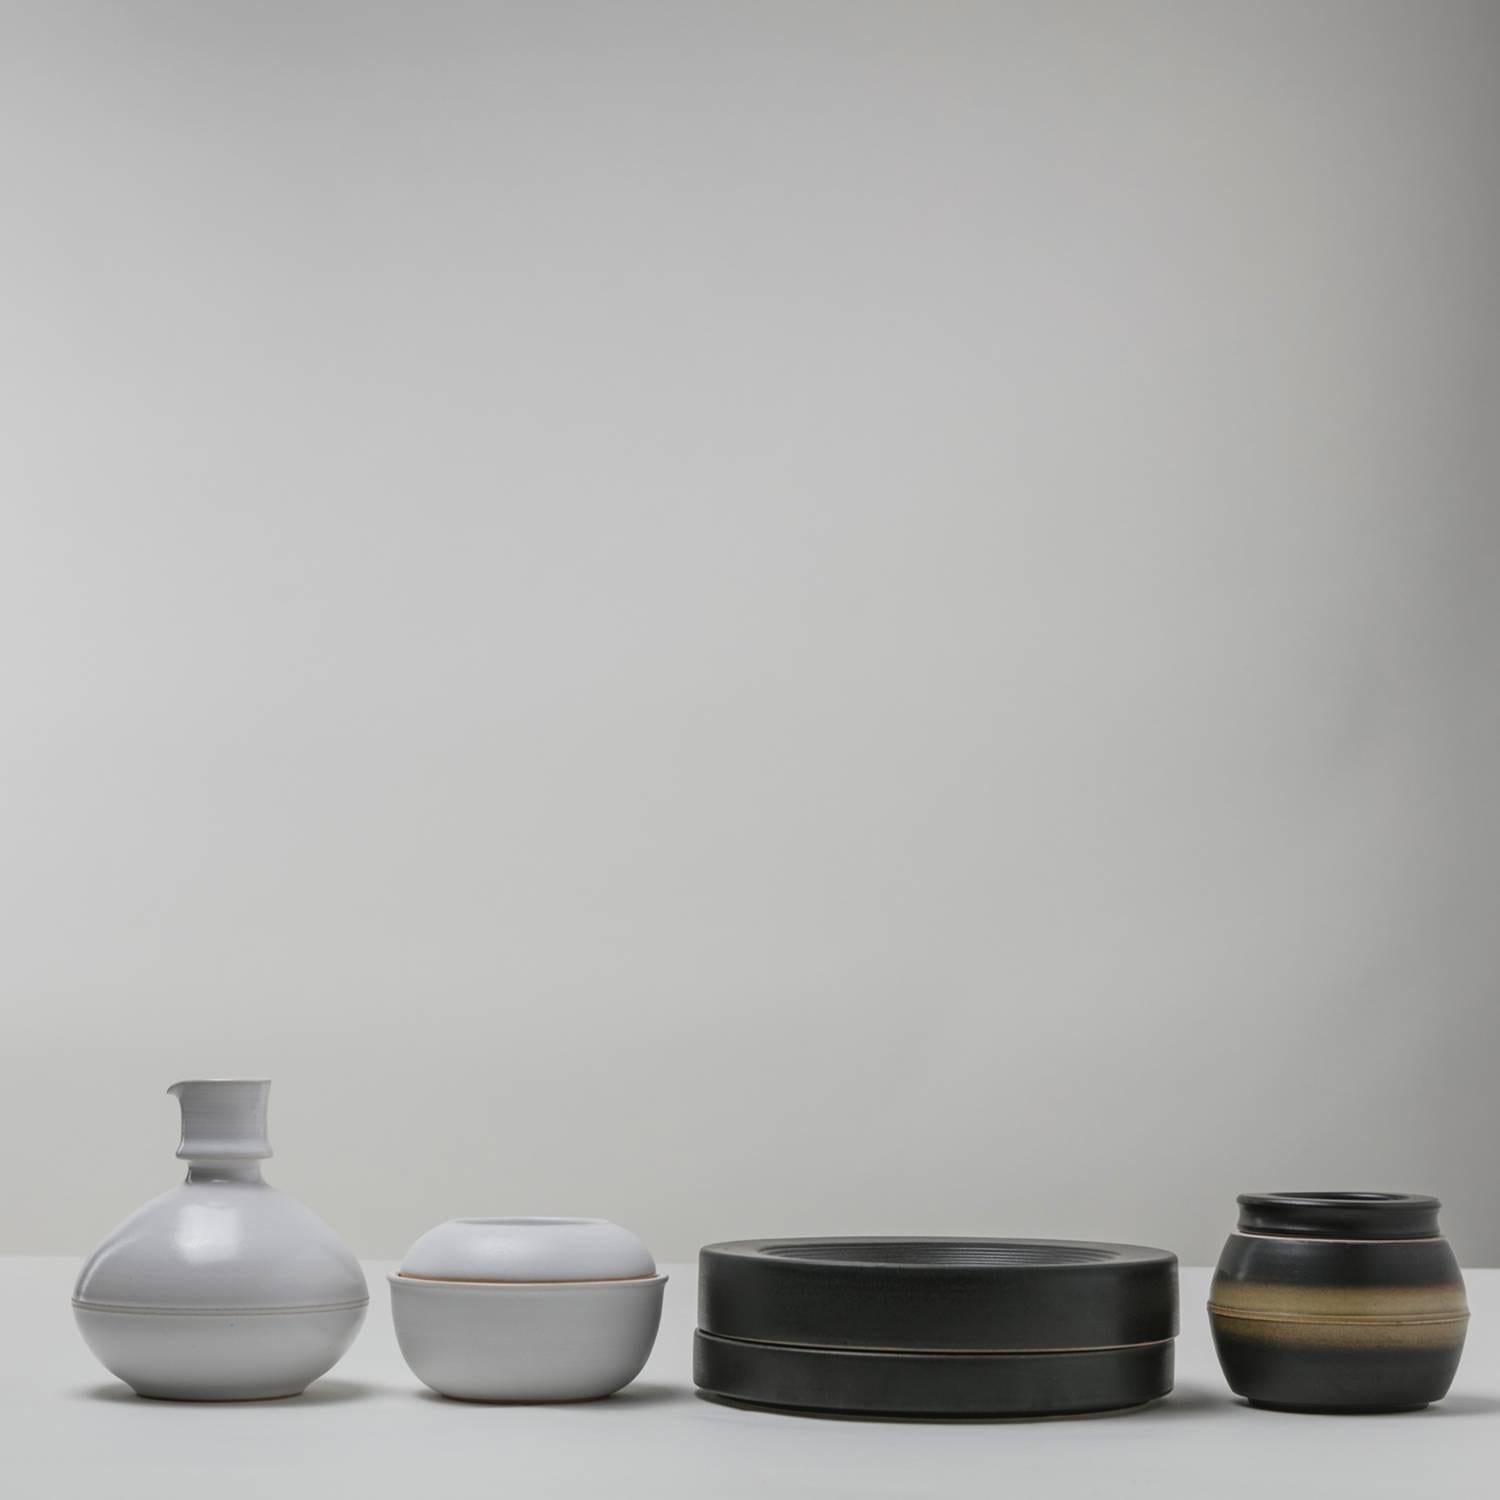 Set of four ceramic pieces by Franco Bucci for Laboratorio Pesaro.
Two round boxes, one small pitcher and an ashtray.
Set refers to this last biggest round piece.